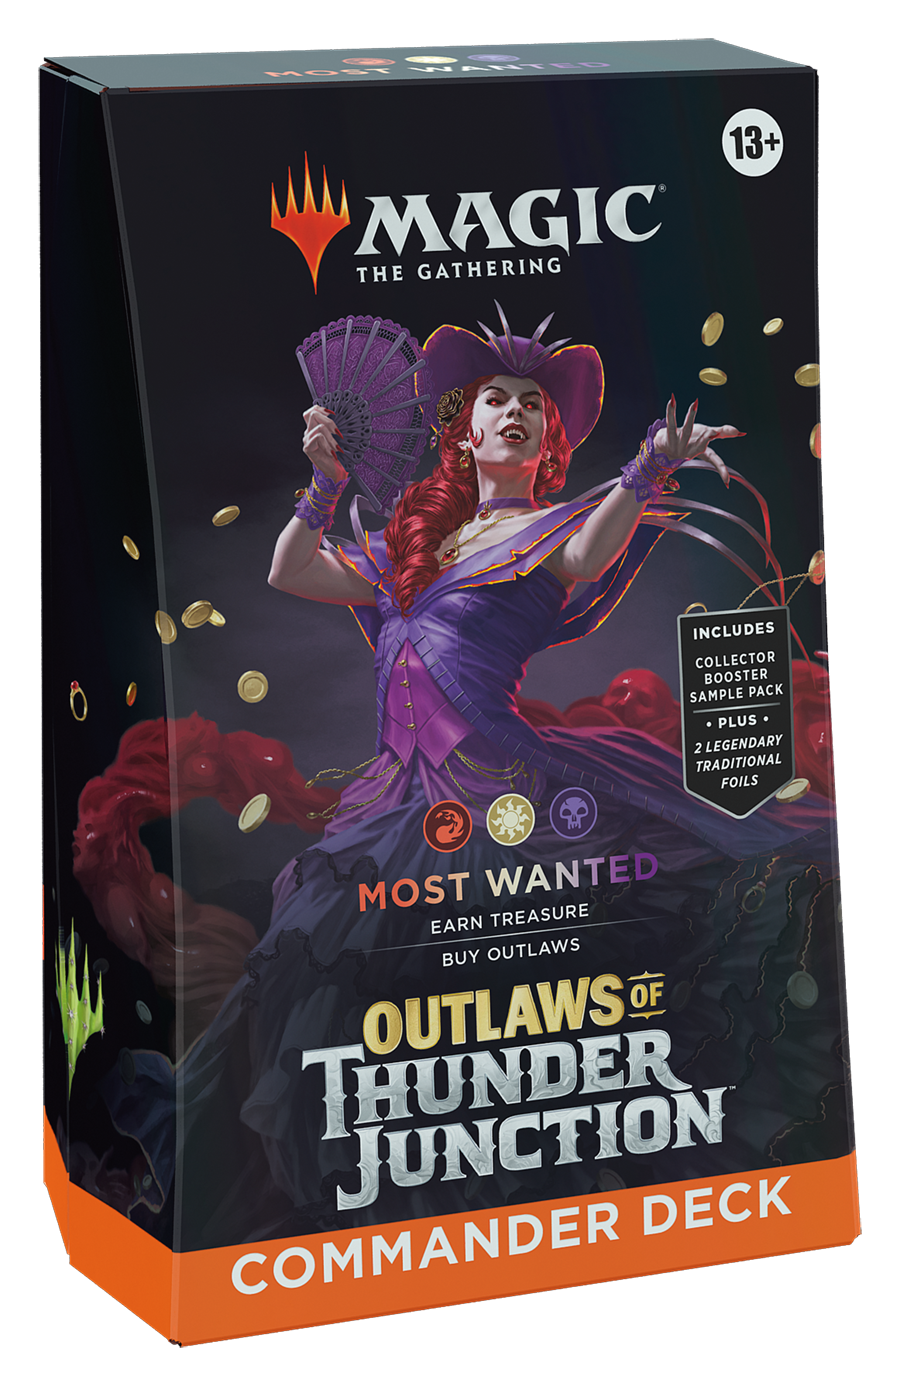 Most Wanted: Outlaws of Thunder Junction Commander Deck